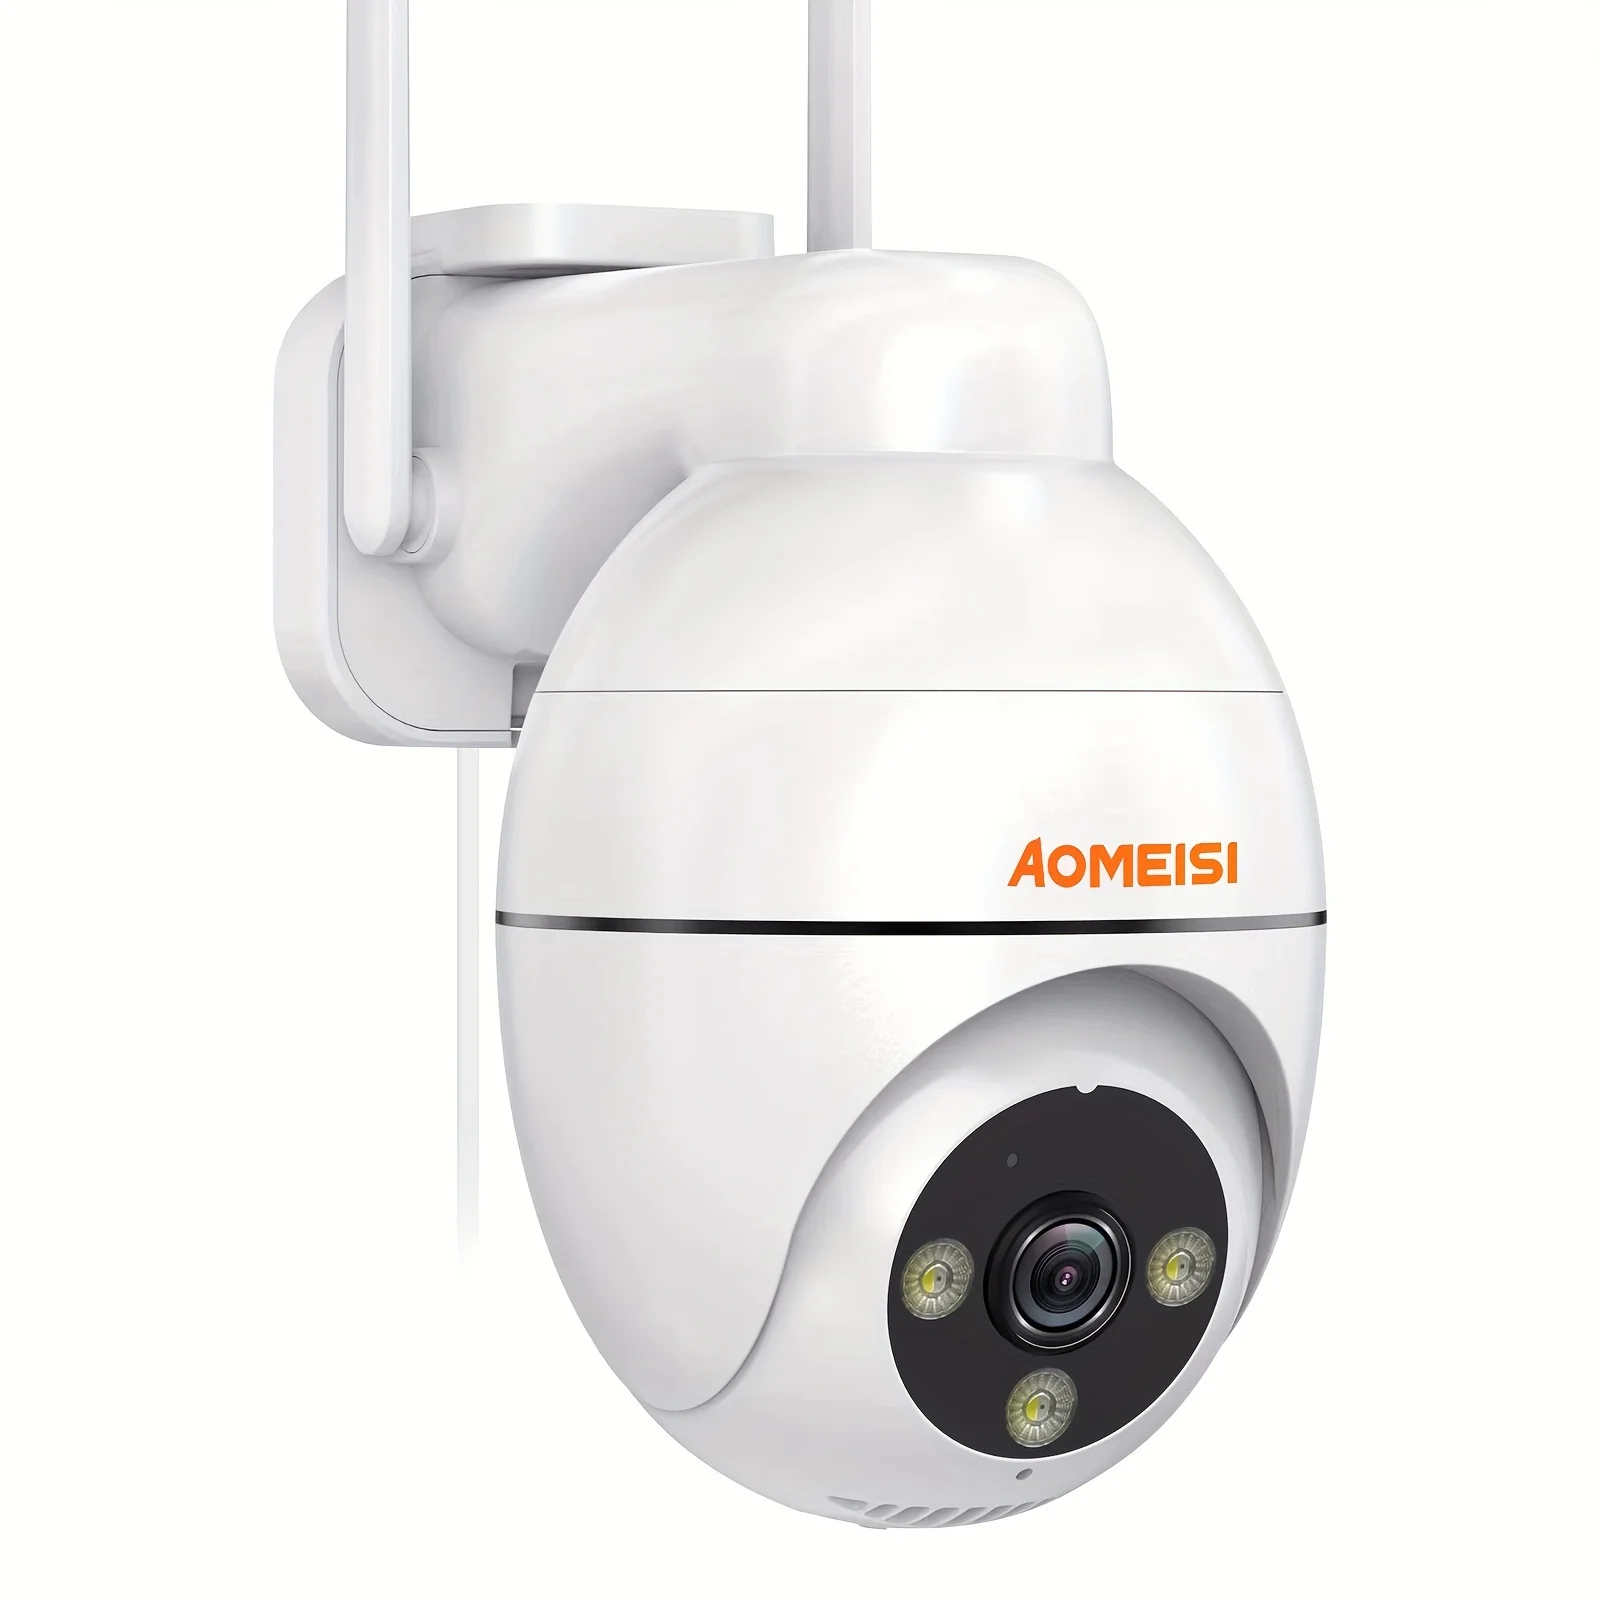 

3MP Security Camera Outdoor, 360°View Pan/Tilt, Two-Way Audio,Easy To Setup, Audible Flashlight Alarm,Motion Alert,SD Slot & Cl